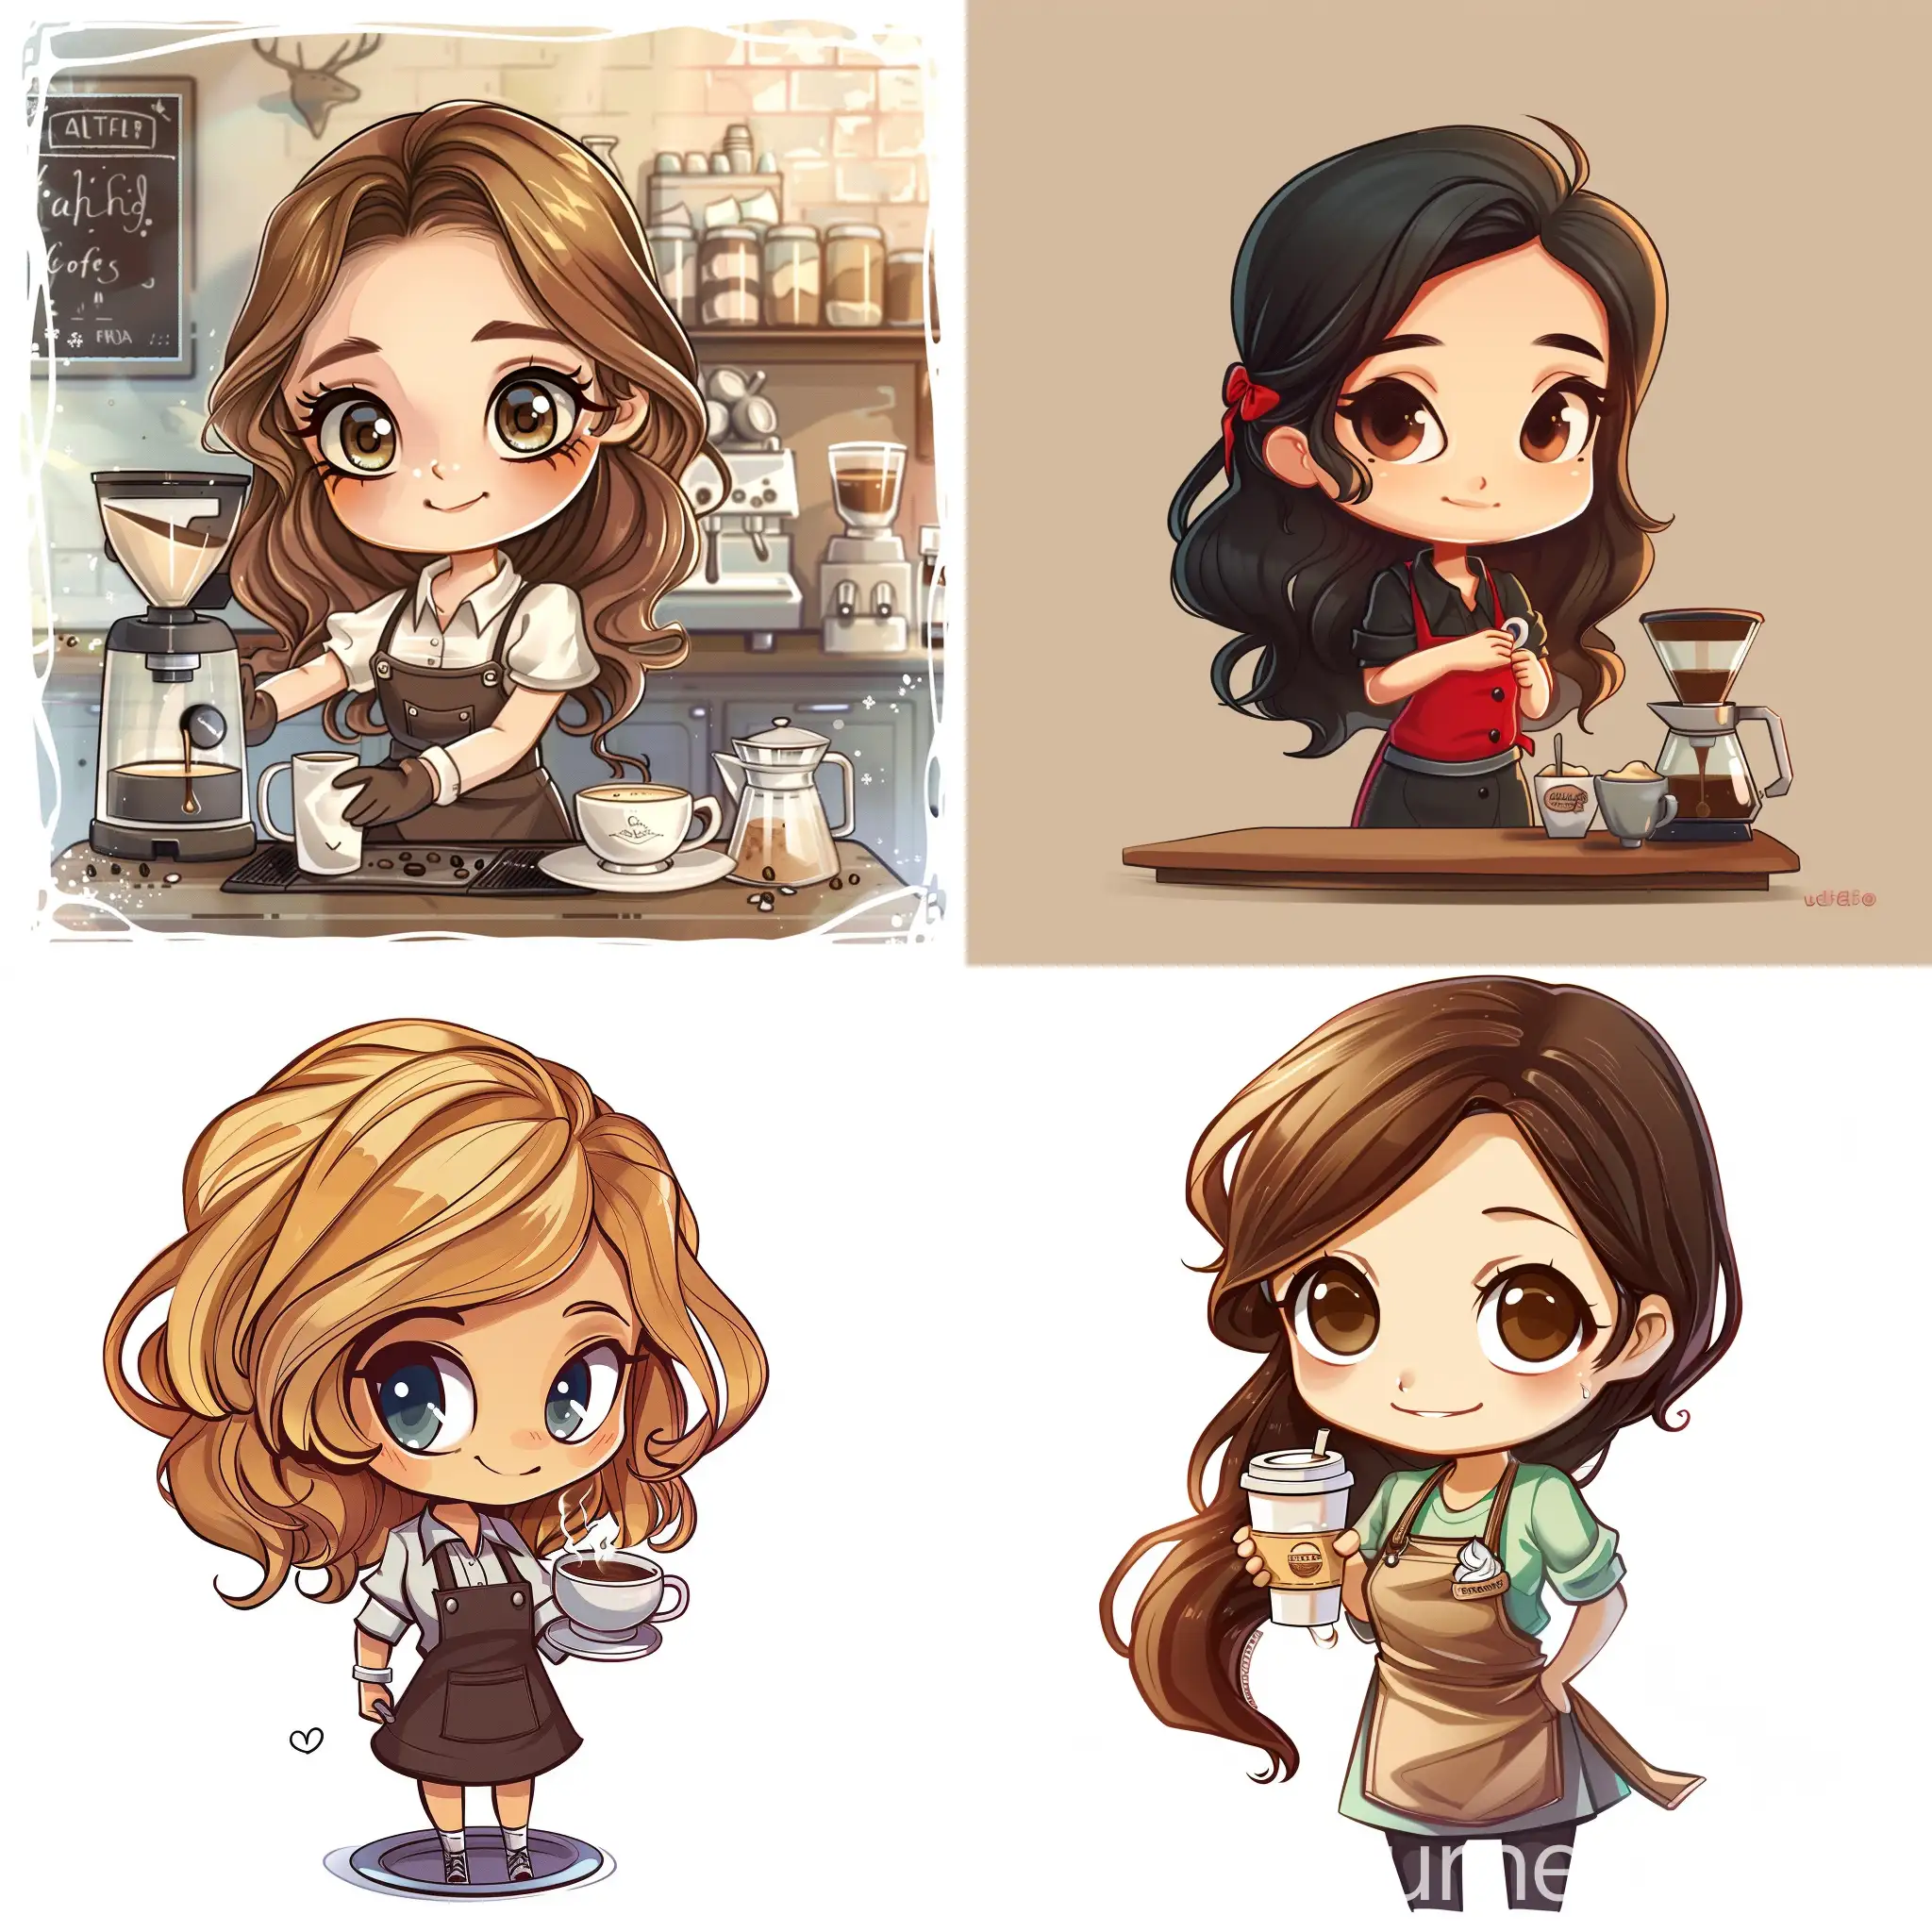 Chibi-Barista-Serving-Coffee-in-Cute-Anime-Style